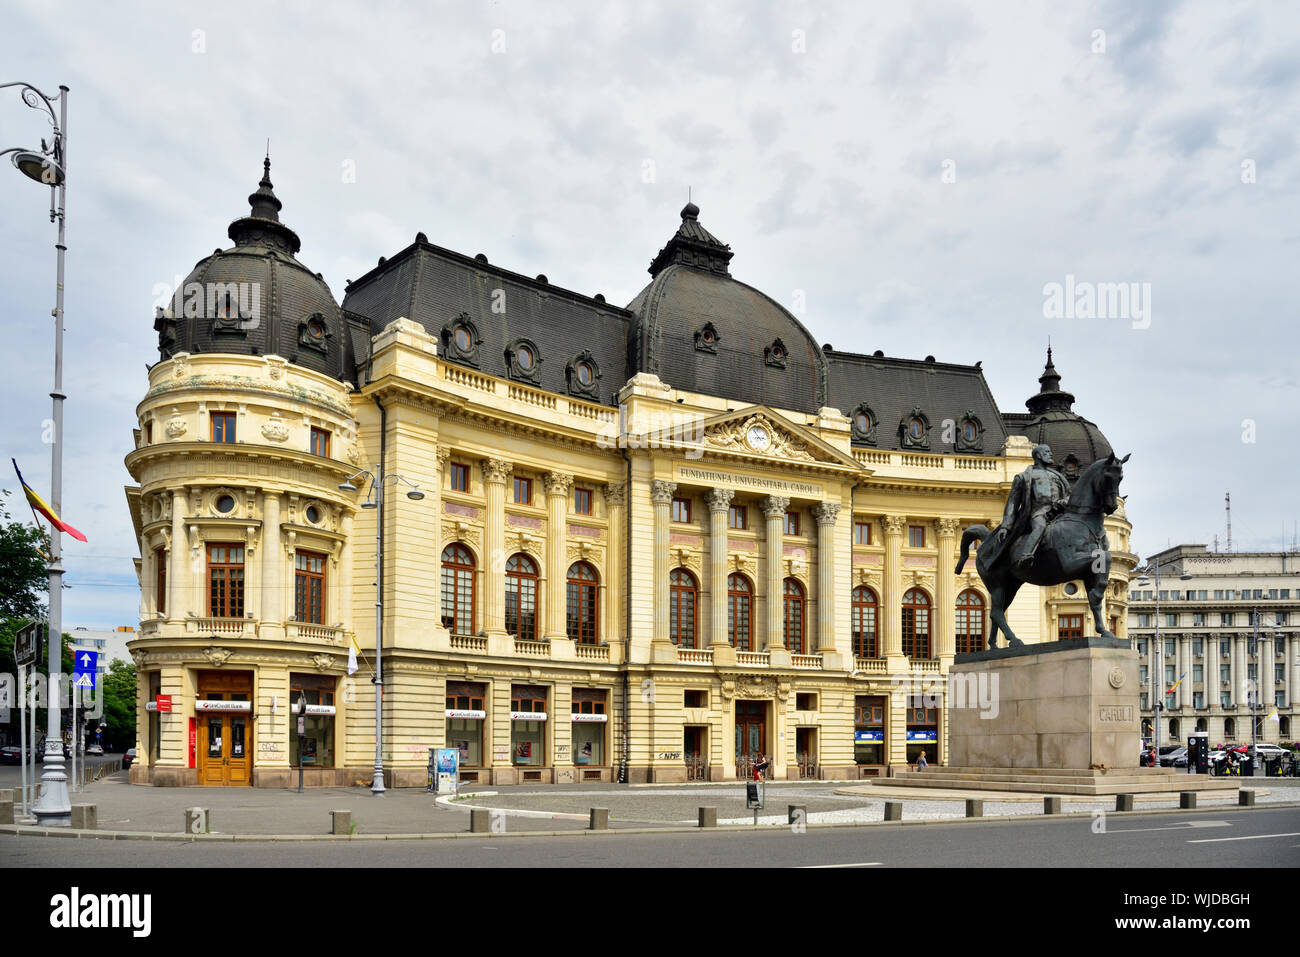 Library of Carol I University Foundation in Calea Victoriei, the oldest and most representative historical boulevard in Bucharest. Romania Stock Photo